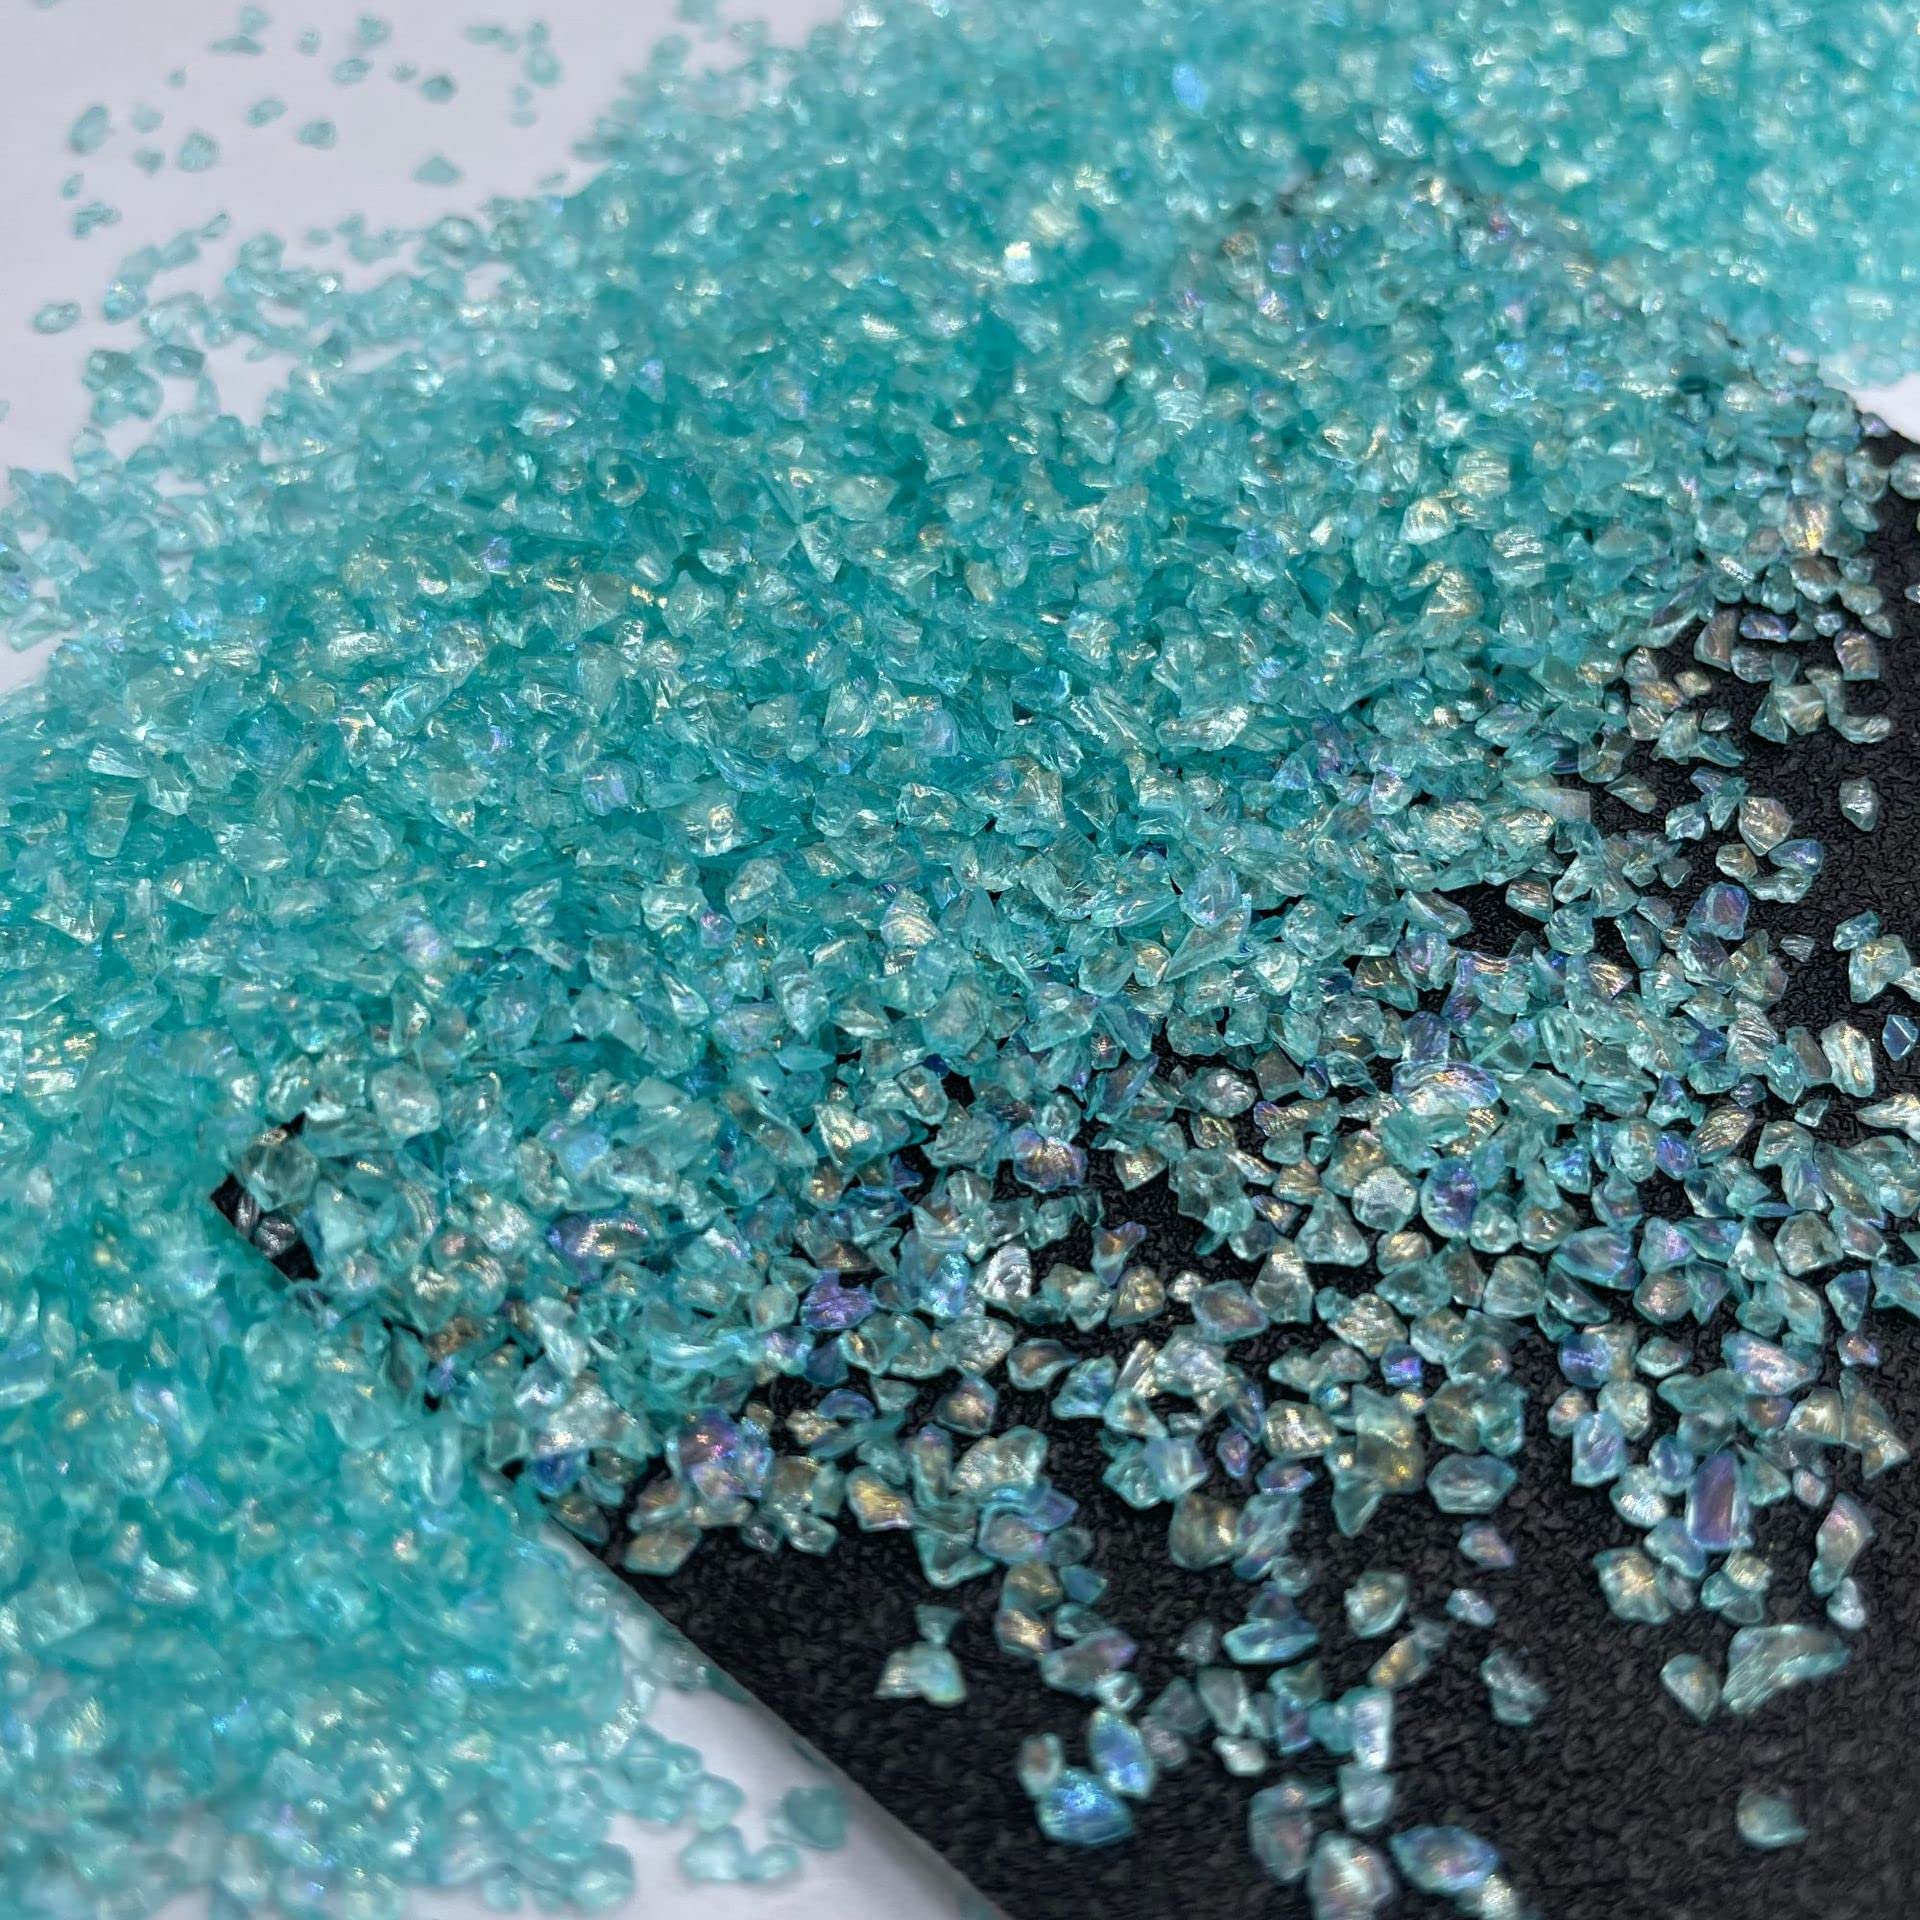 CRUSHED GLASS FOR RESIN ART, craft, home decor, vase filler. Free shipping